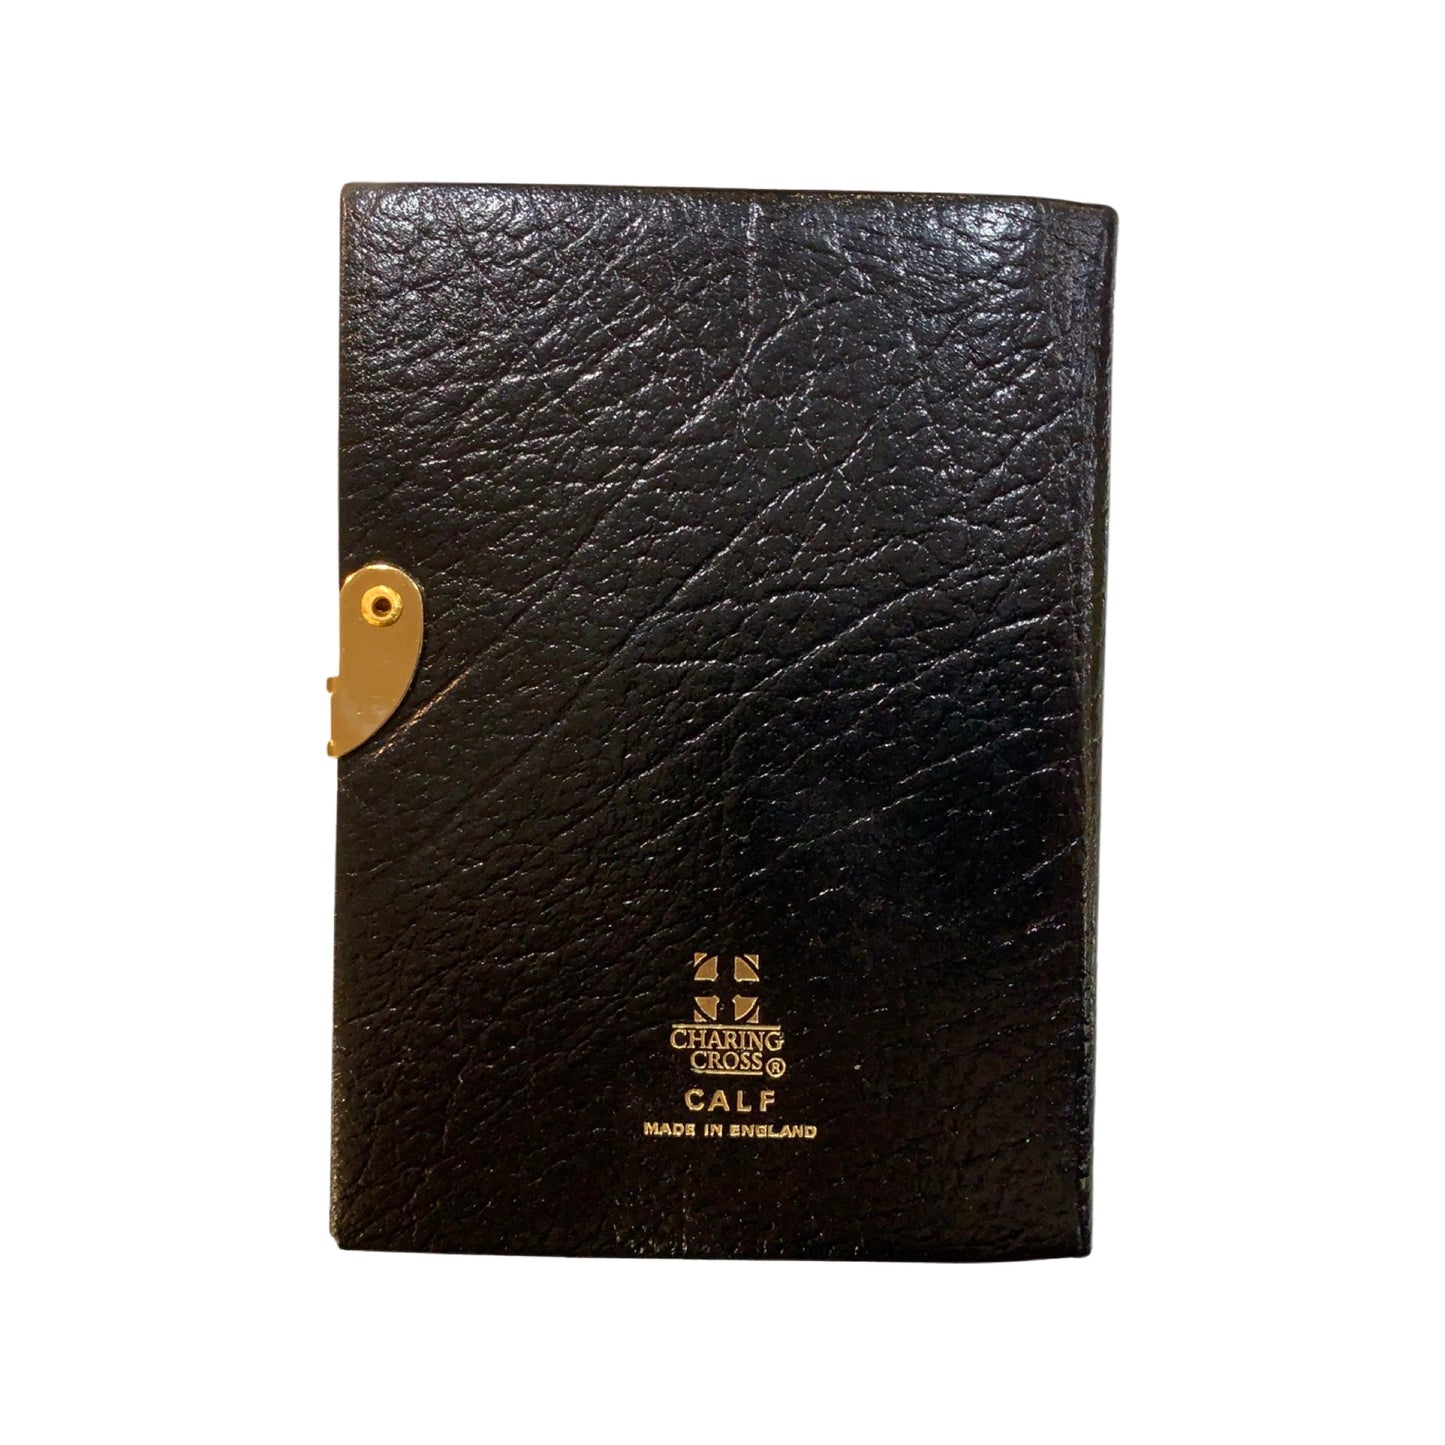 Address Book, 4 by 2.75 inches | Buffalo Embossed Calf | with Pencil and Clasp | A42BJC